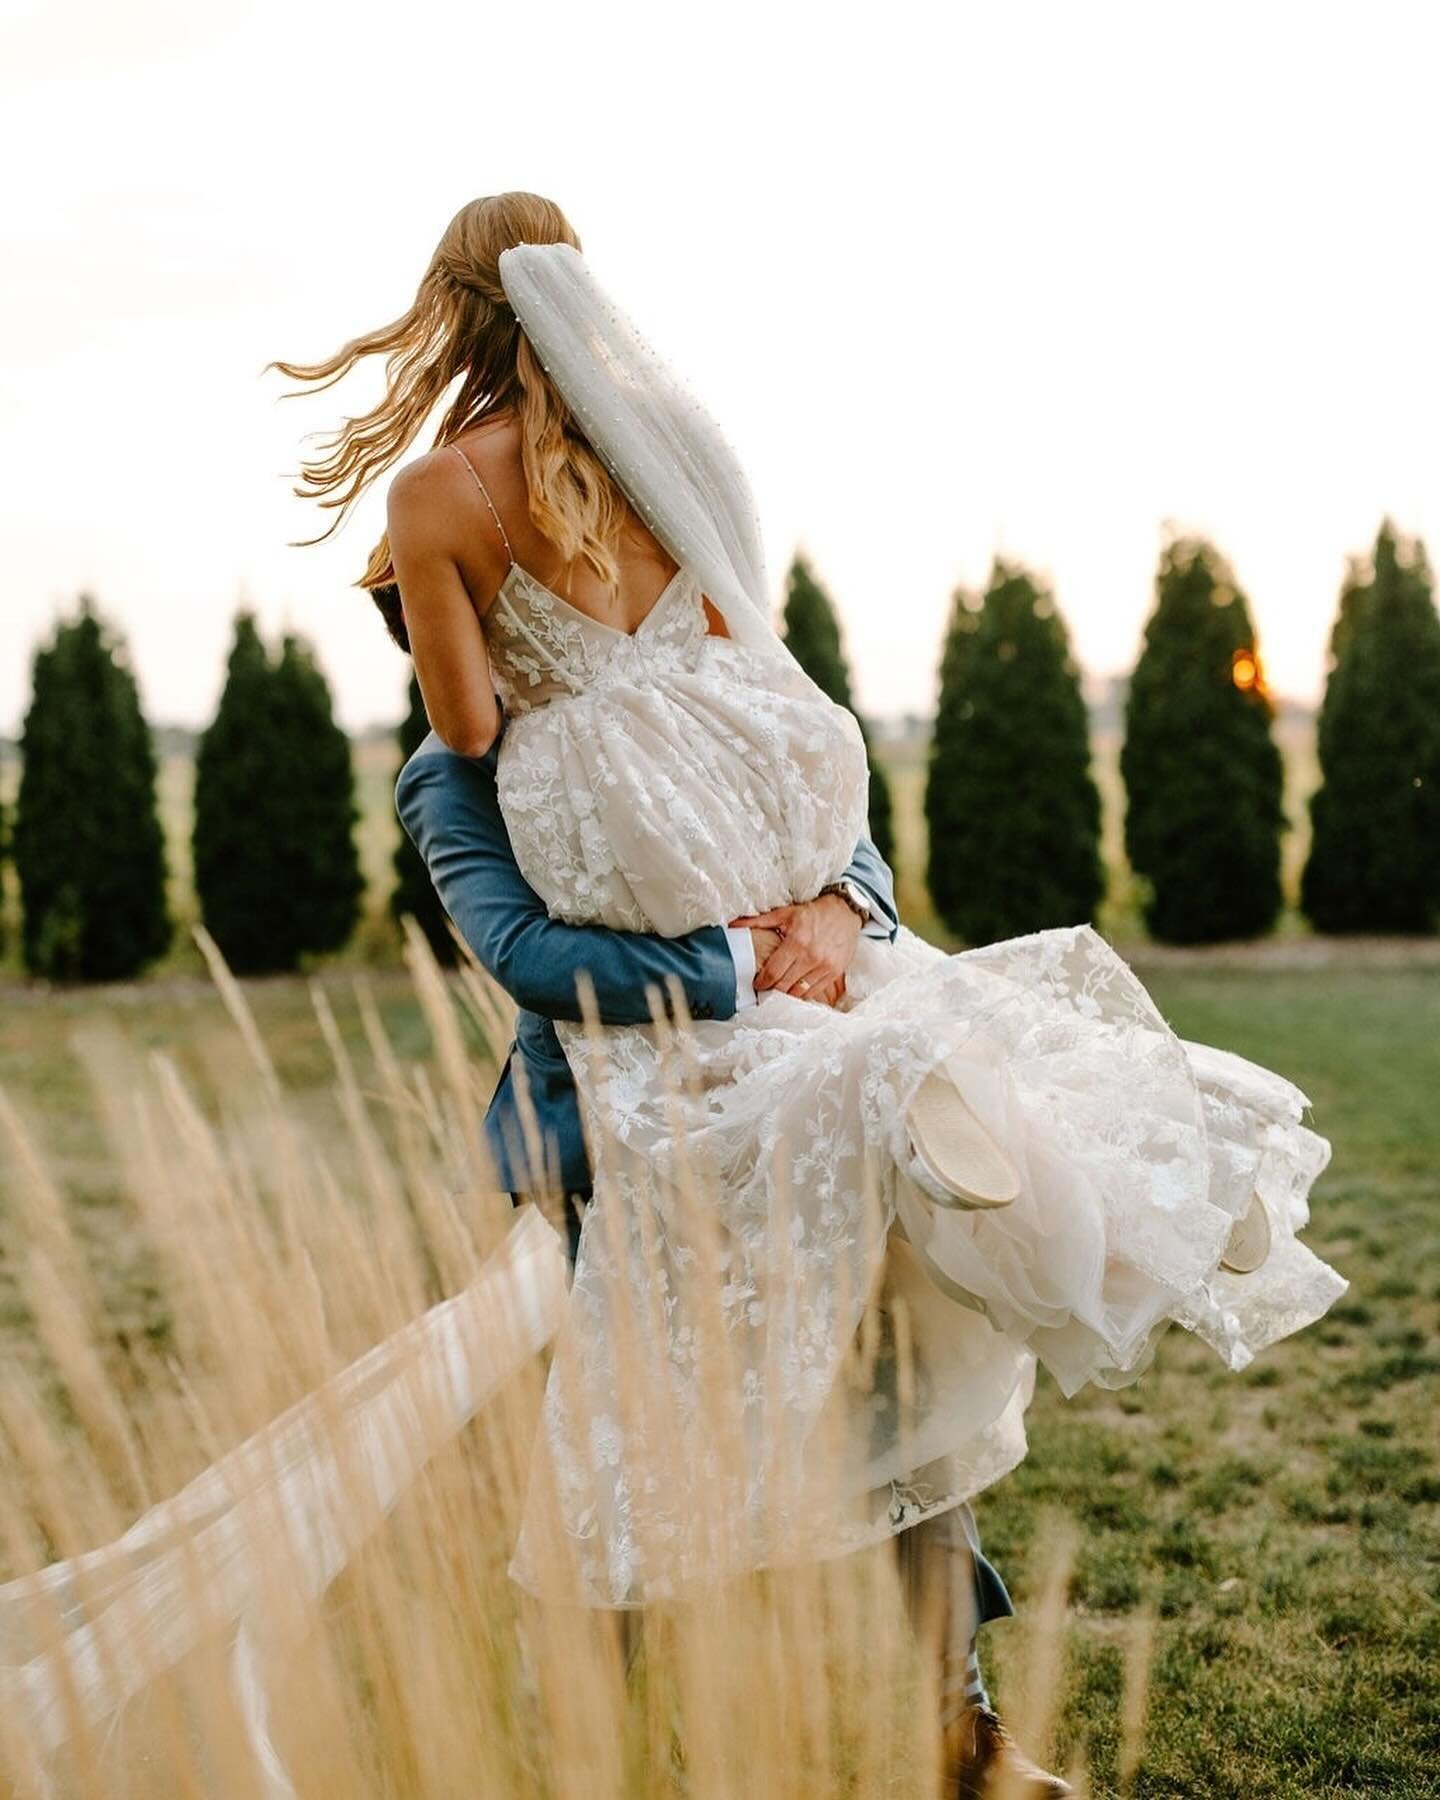 Just waiting on those summer sunsets 🙌🏼
@ashery_lane providing the best backdrops and spaces to capture some juicy golden hour moments
⠀⠀⠀⠀⠀⠀⠀⠀⠀
📷 @whitneyabrahamson 
.
.
#bride #mnbride #mnevents #weddingplanner #weddingseason #bridal #weddingins